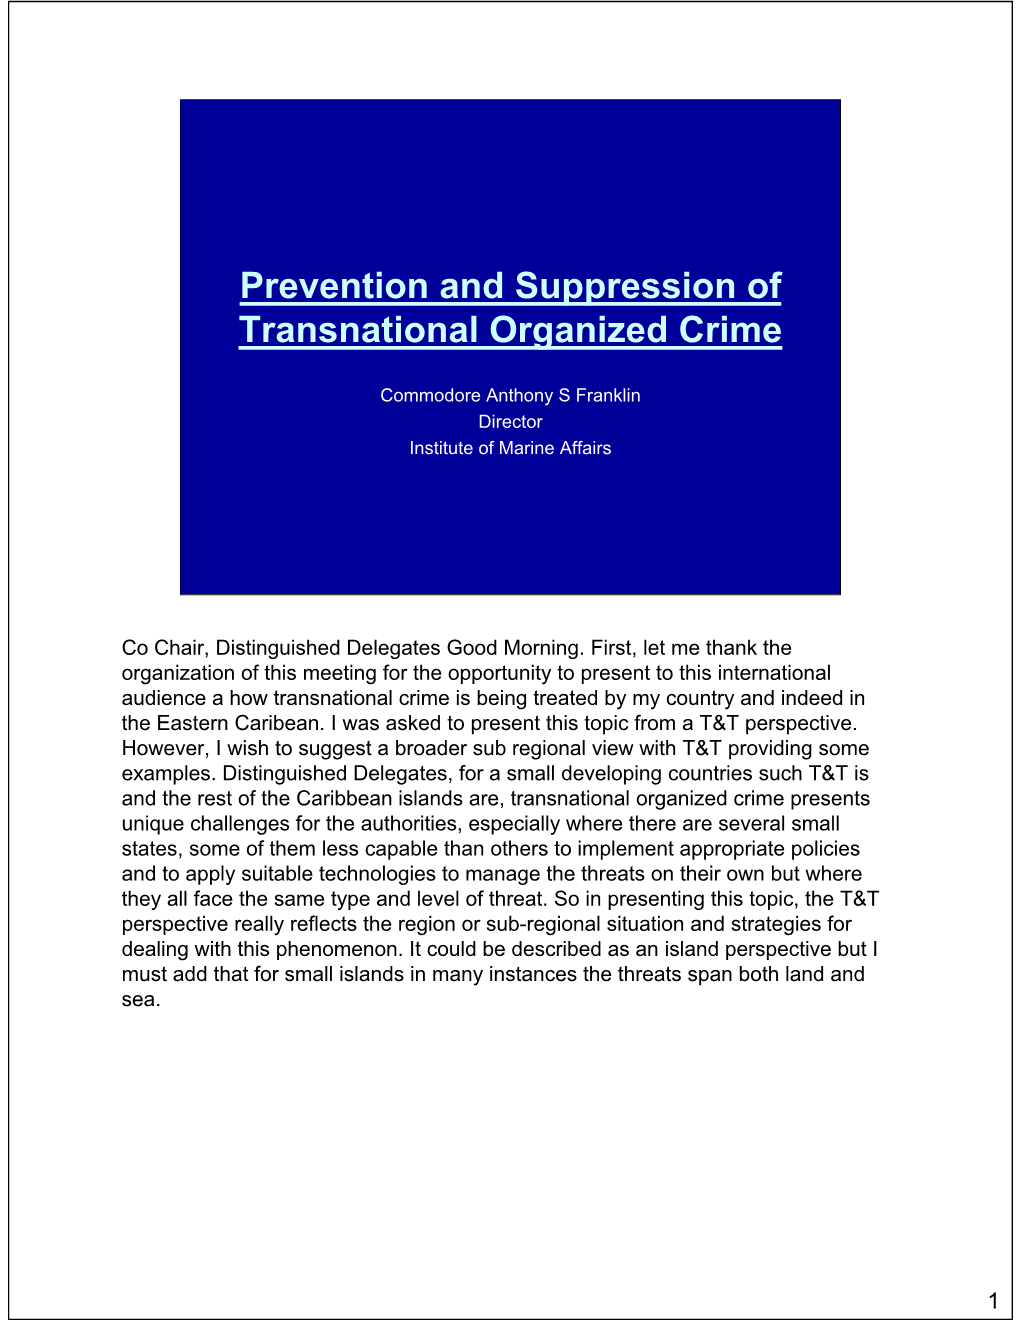 Prevention and Suppression of Transnational Organized Crime